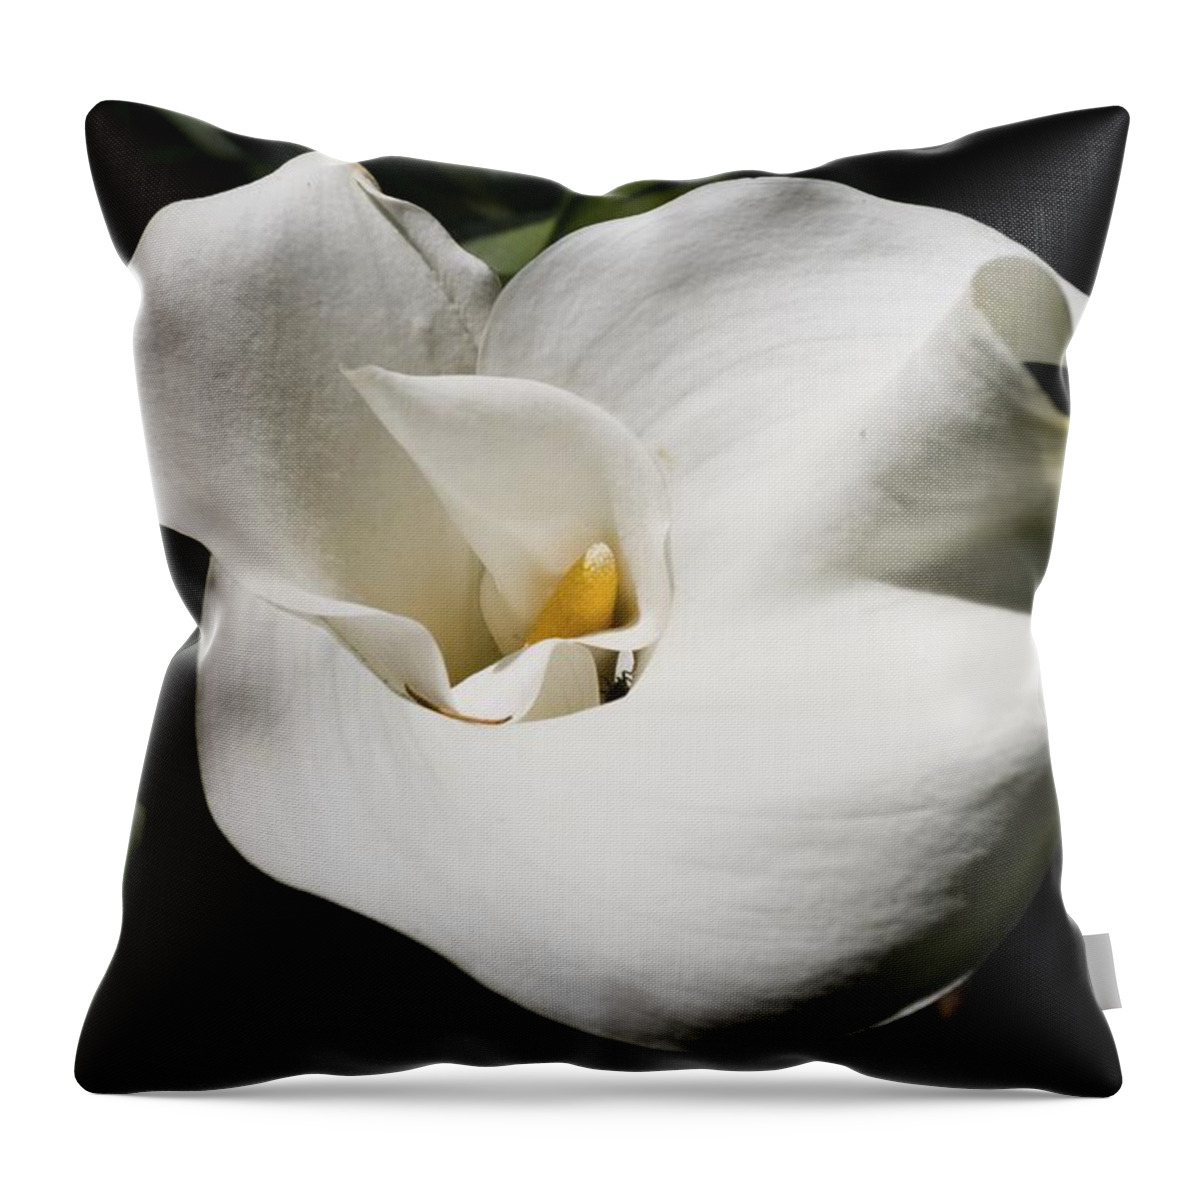 Granger Photography Throw Pillow featuring the photograph White Lily by Brad Granger